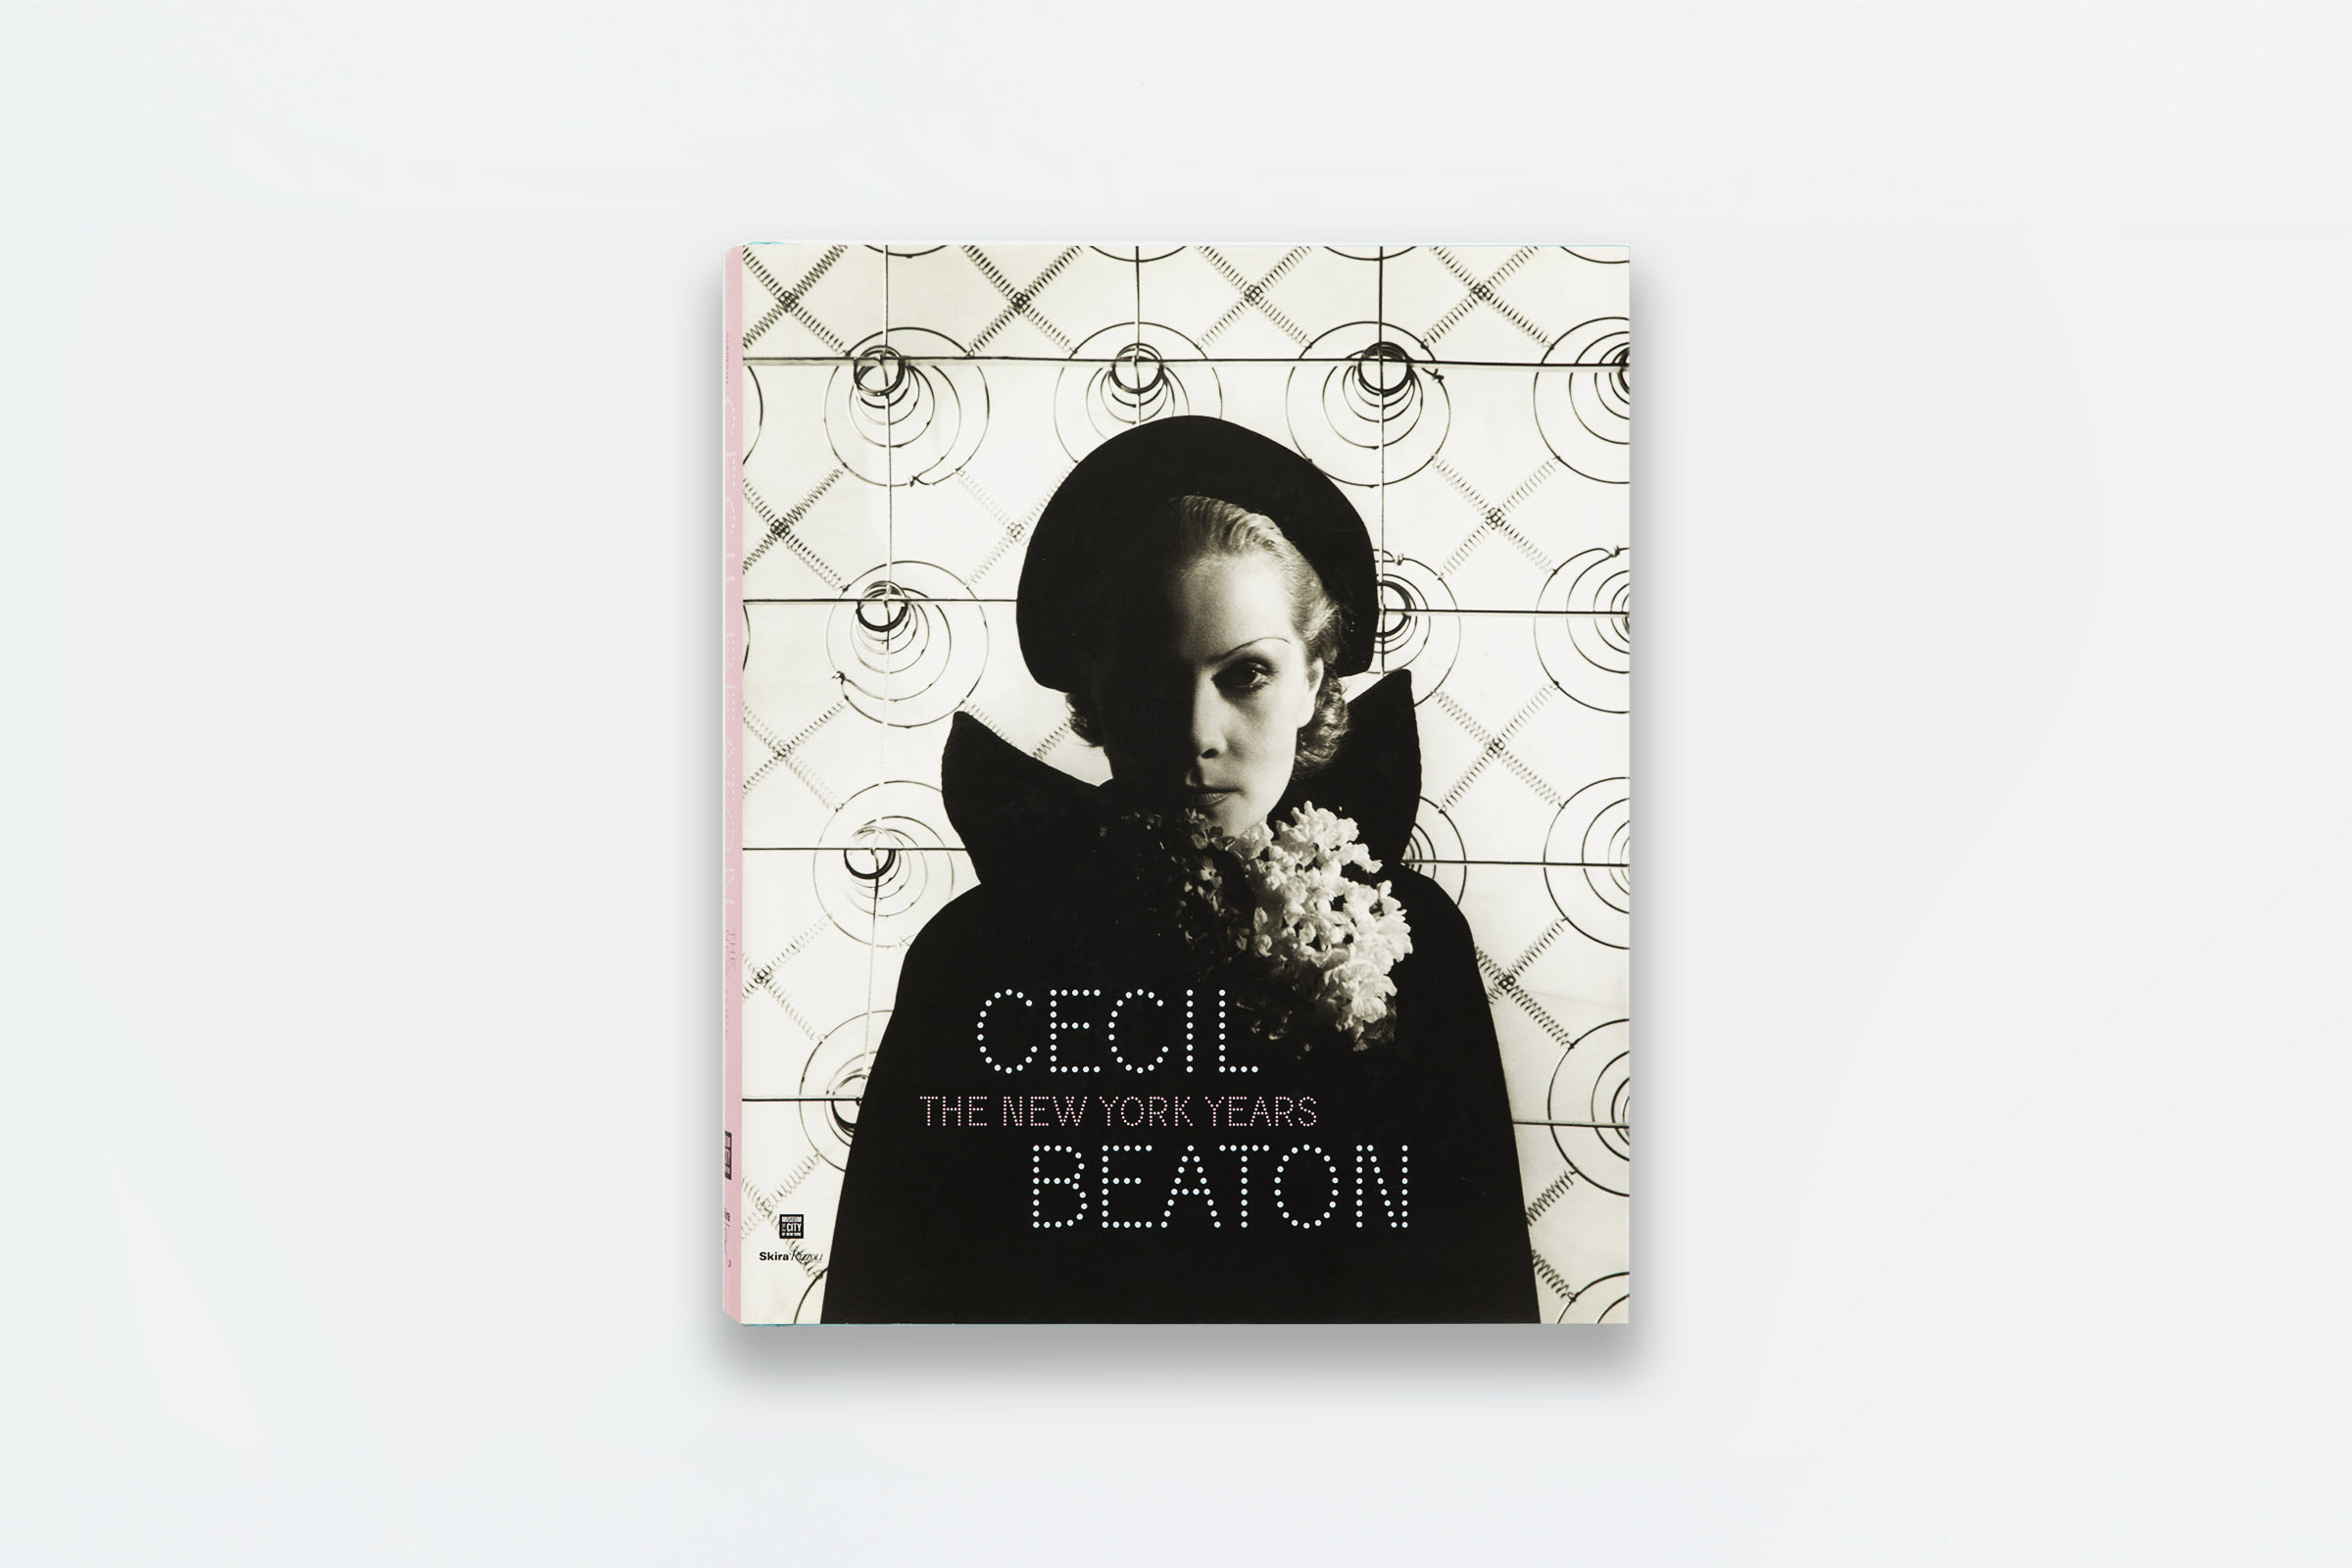 Cecil Beaton: The New York Years